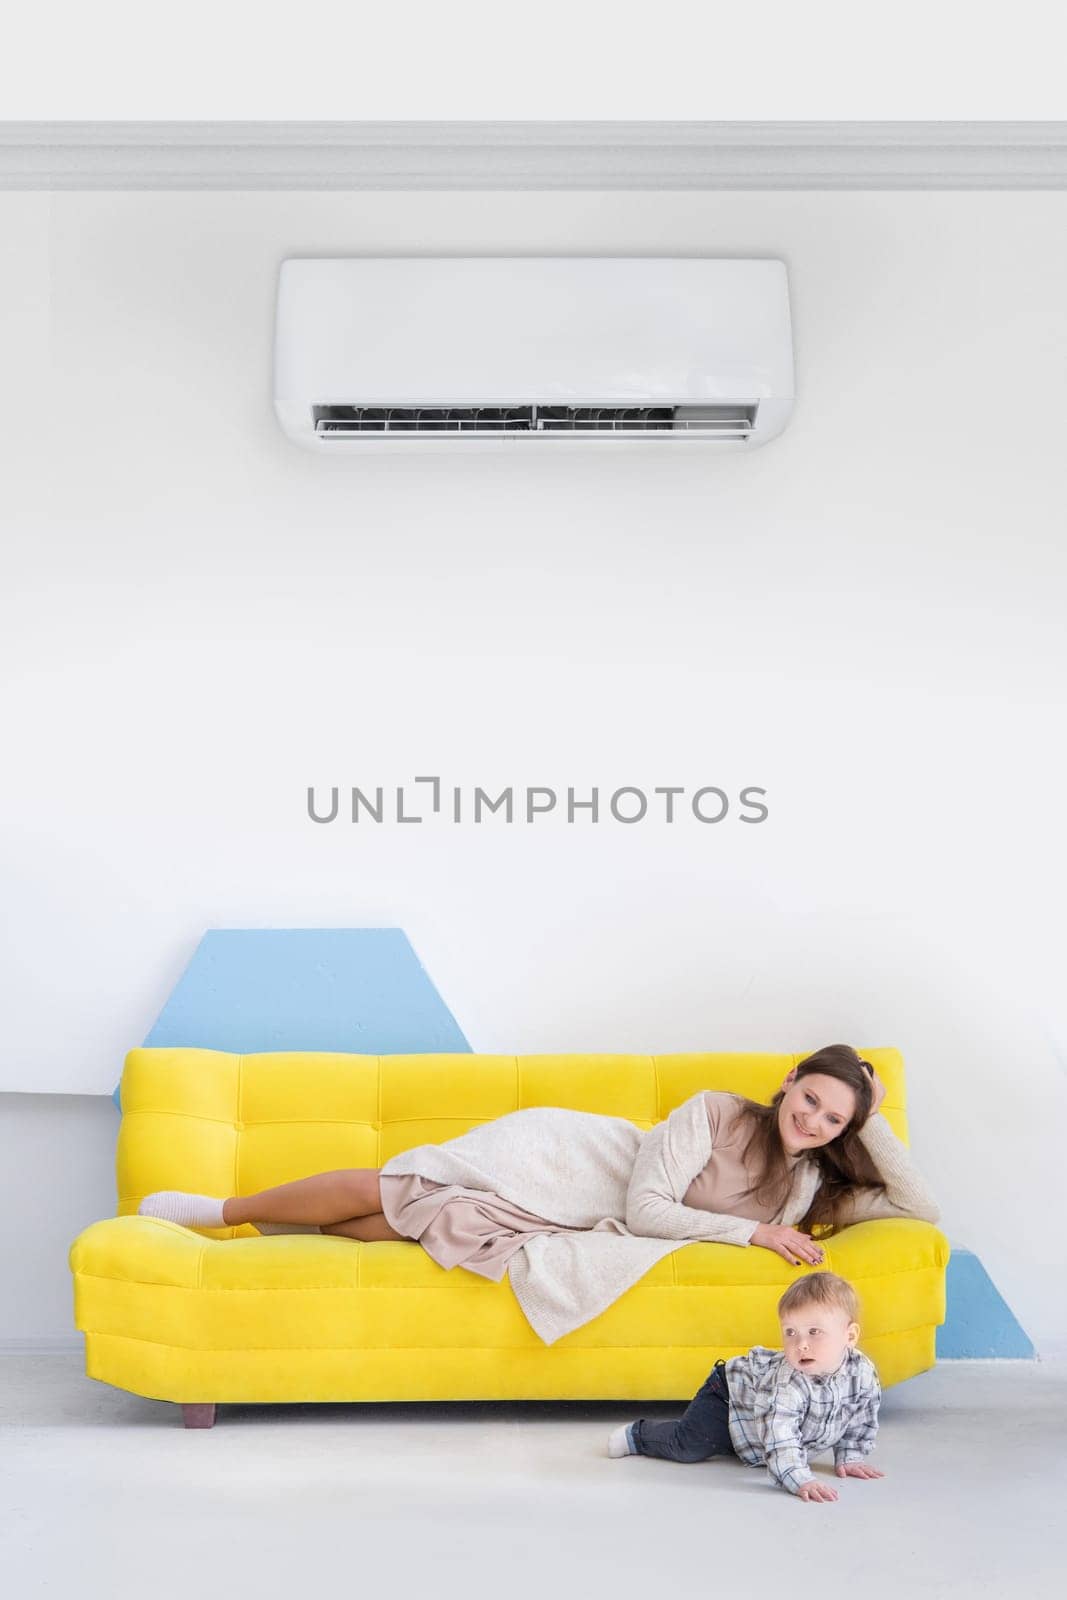 Young caucasian woman with child lies on a yellow sofa in bright interior with split air conditioner.